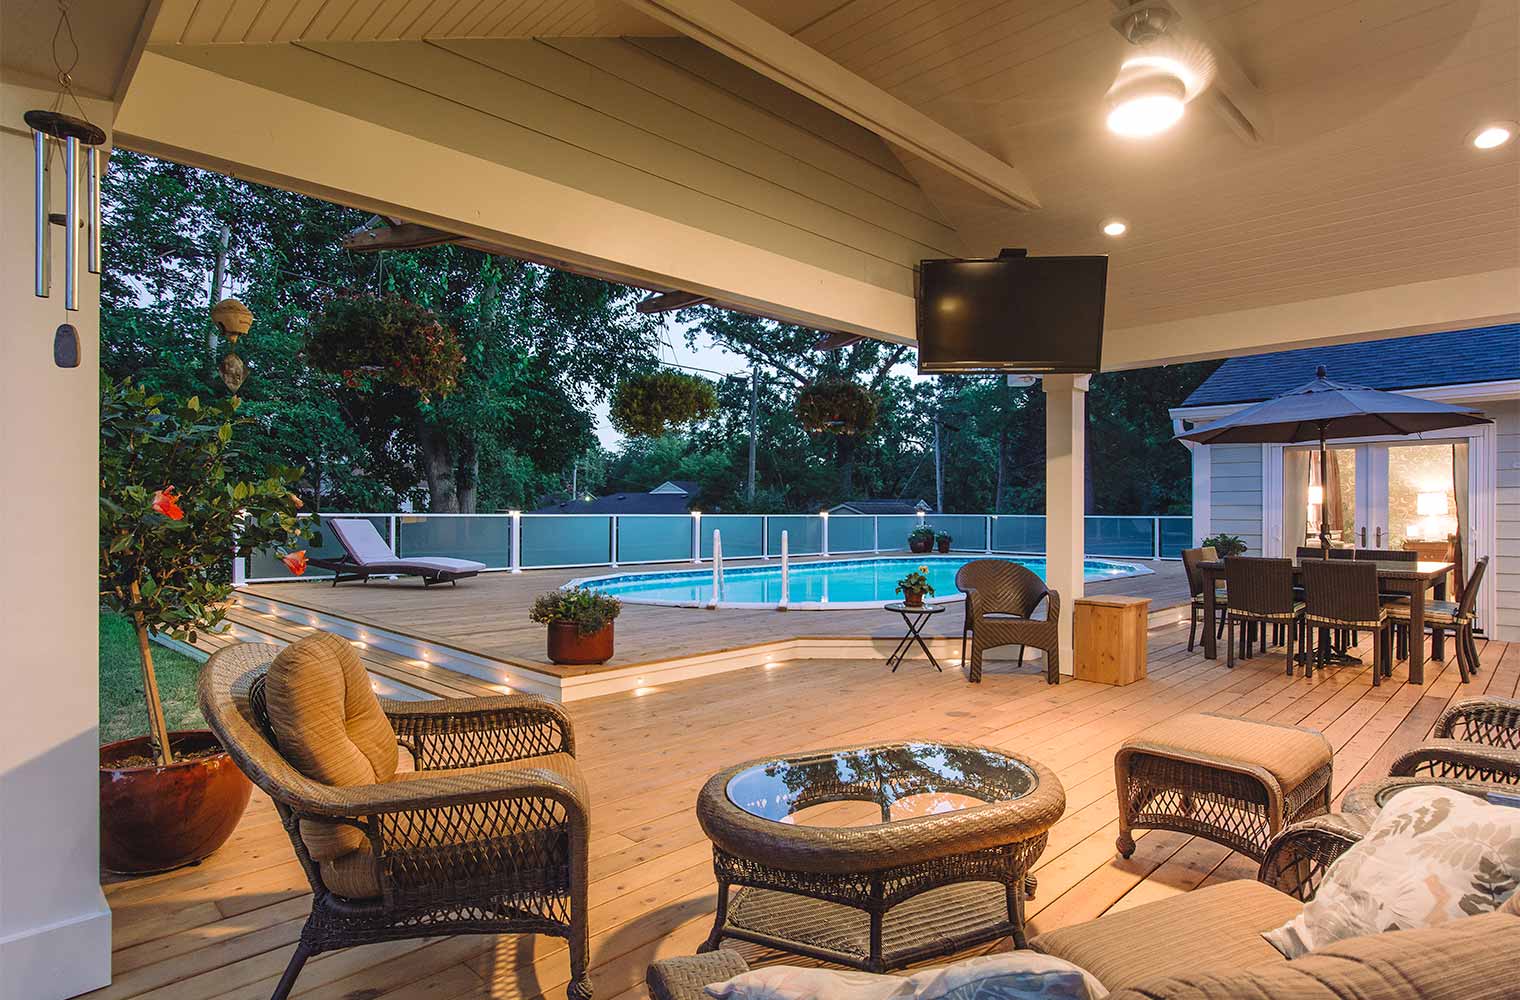 covered outdoor entertaining area and patio by pool deck at midcentury ranch home in Des Moines, Iowa by remodeler Silent Rivers